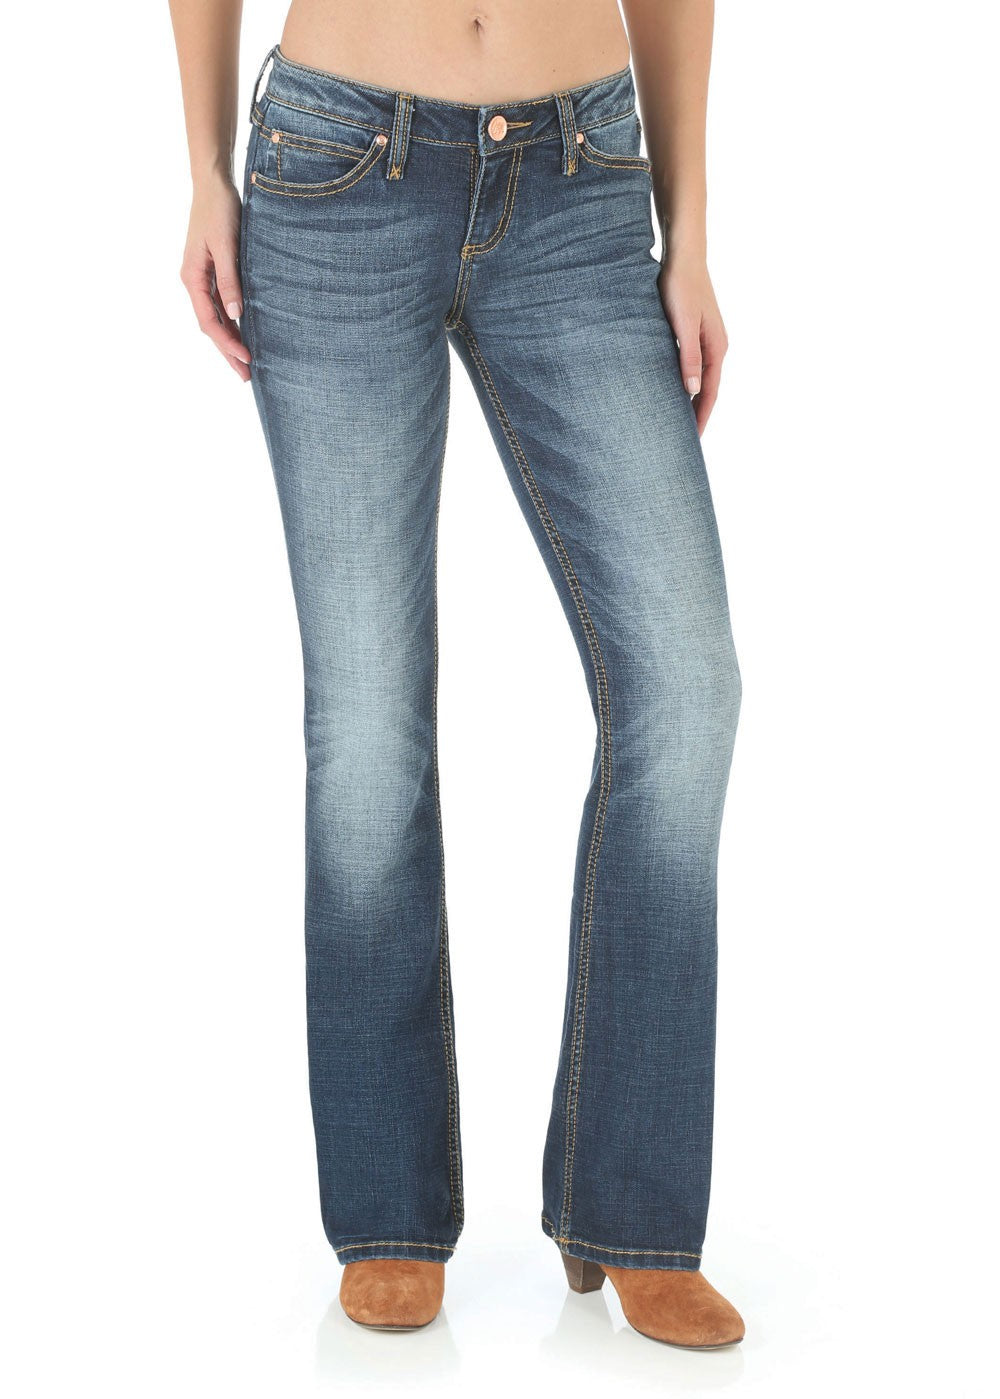 Wrangler - Womens Jeans - 09MWZMS34